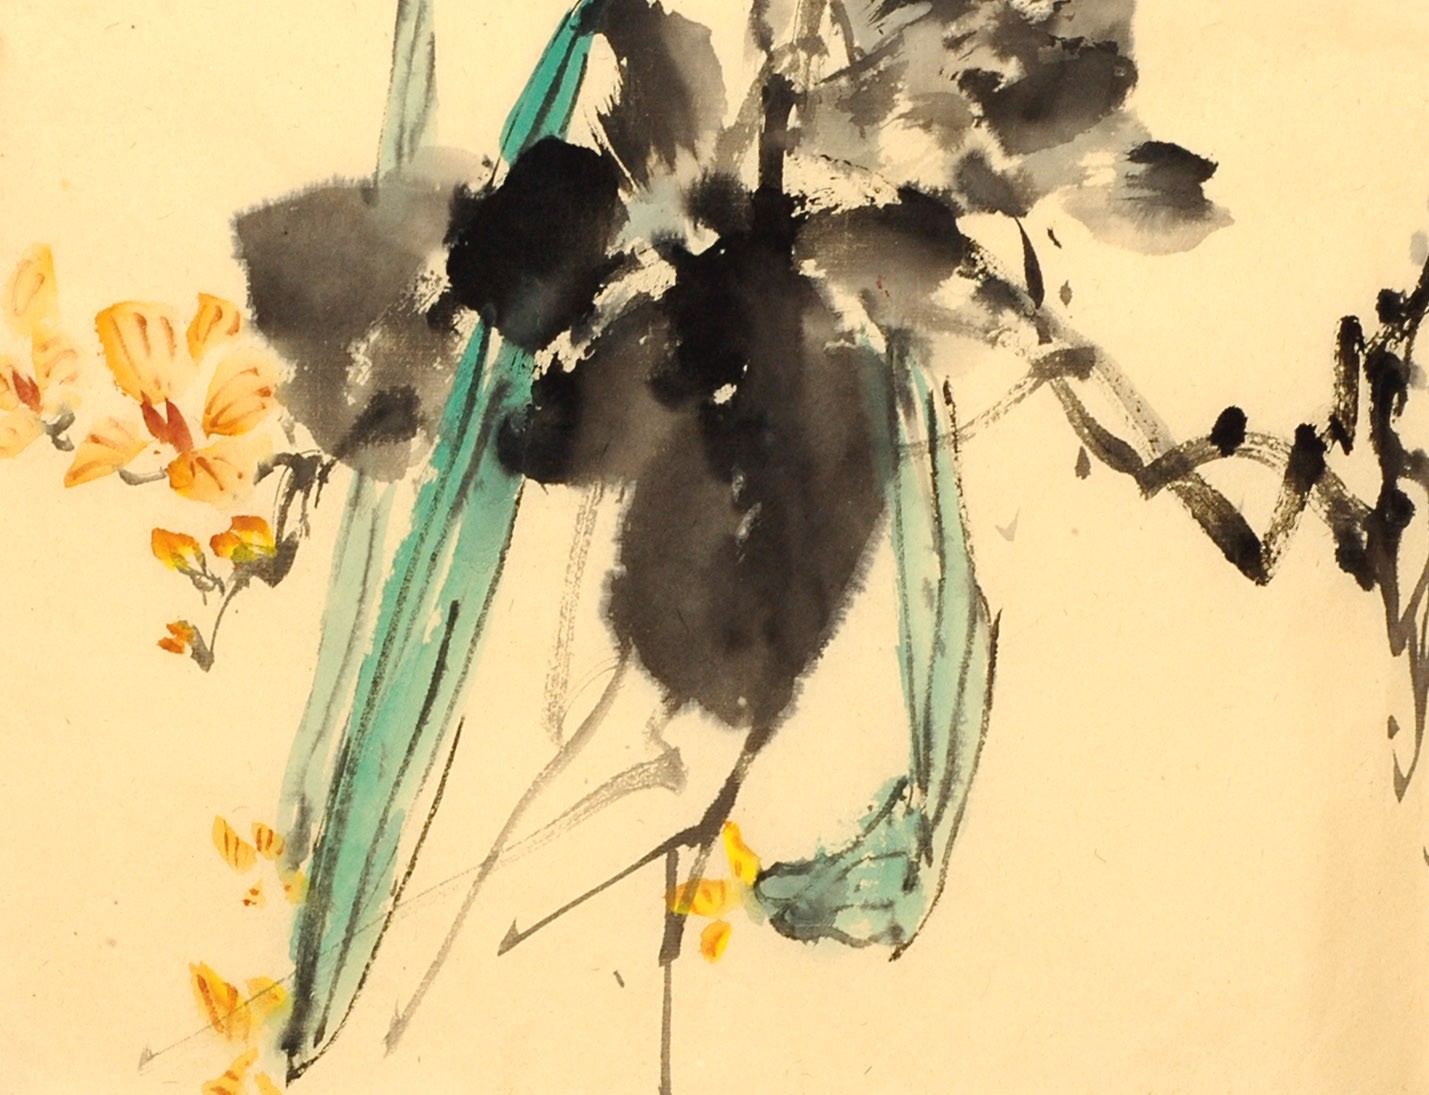 Chinese Flowers&Trees Painting - CNAG012625